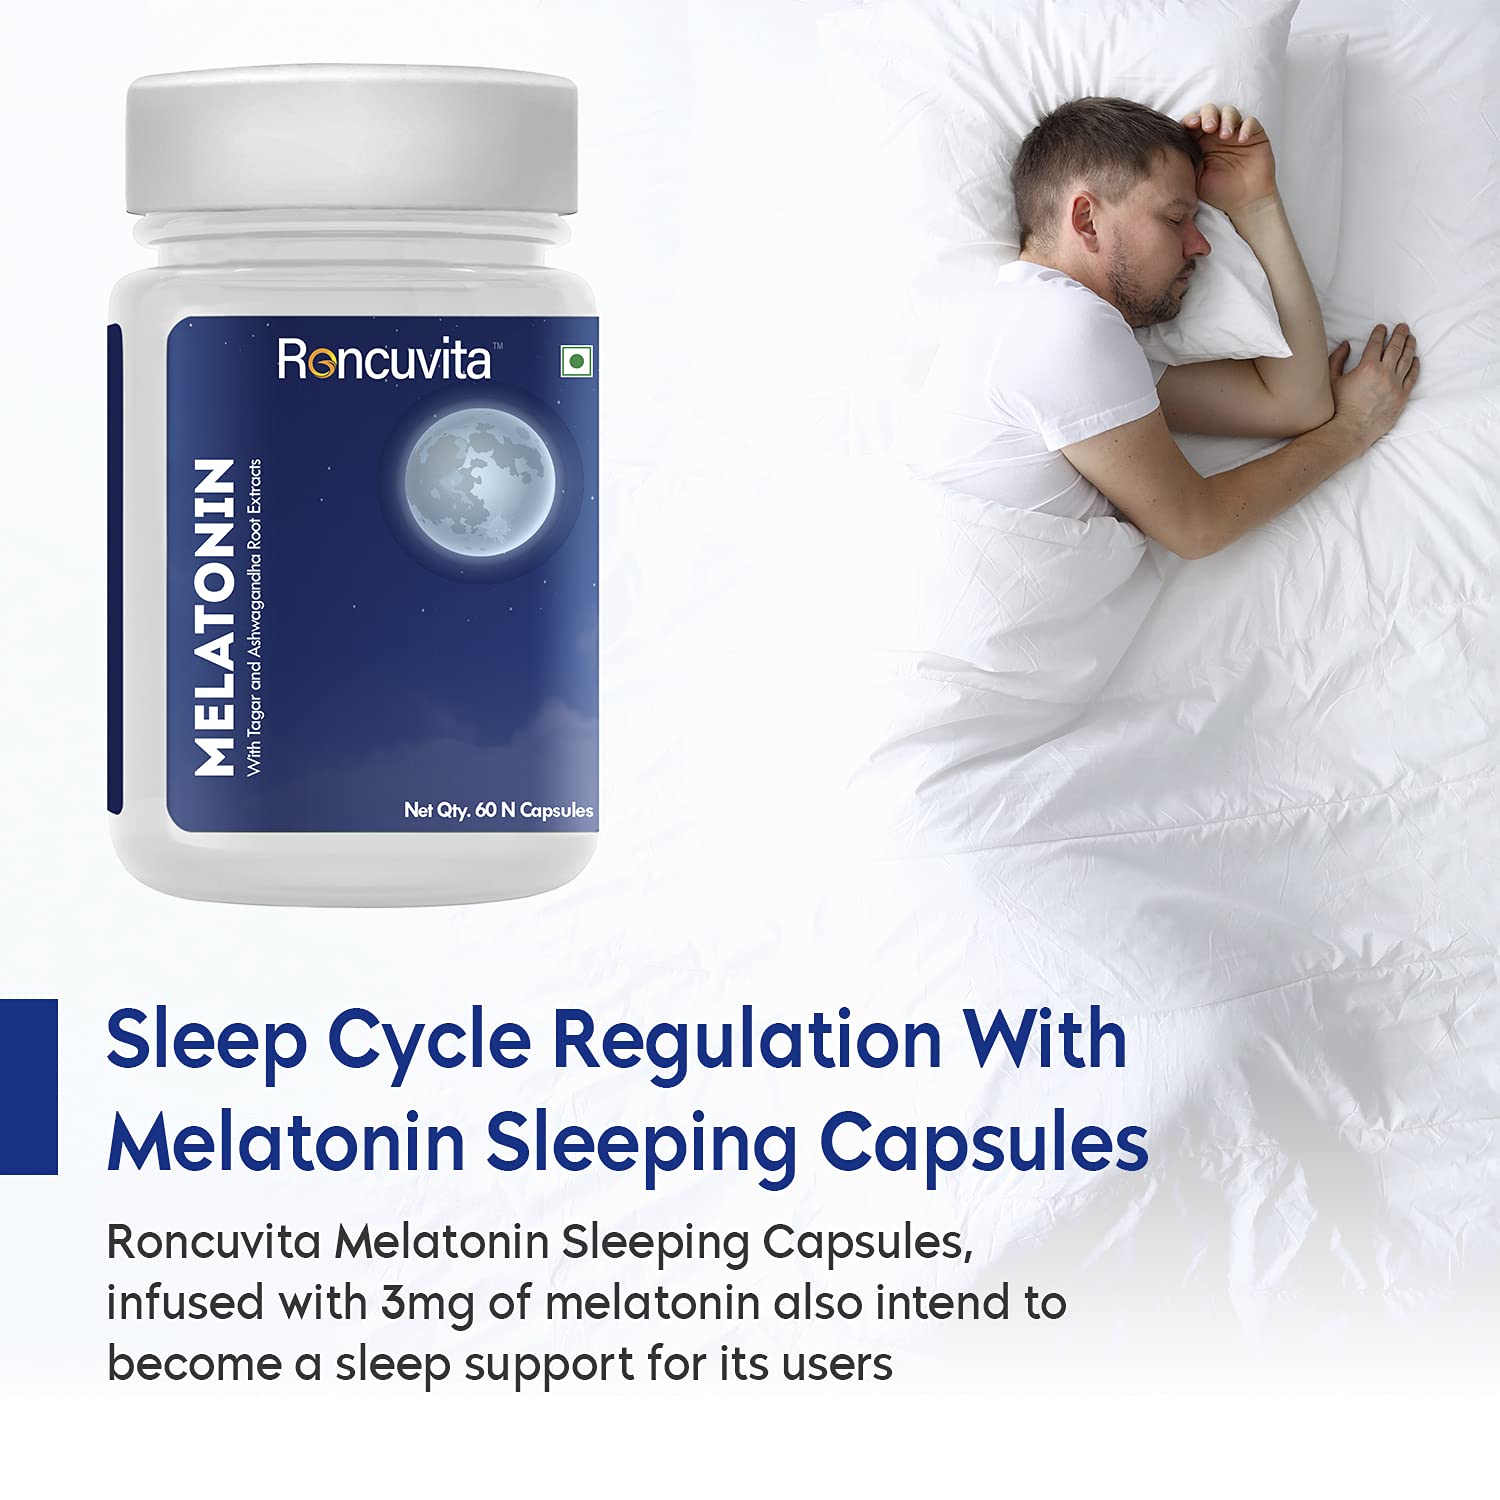 Melatonin for Sleep: What You Need To Know